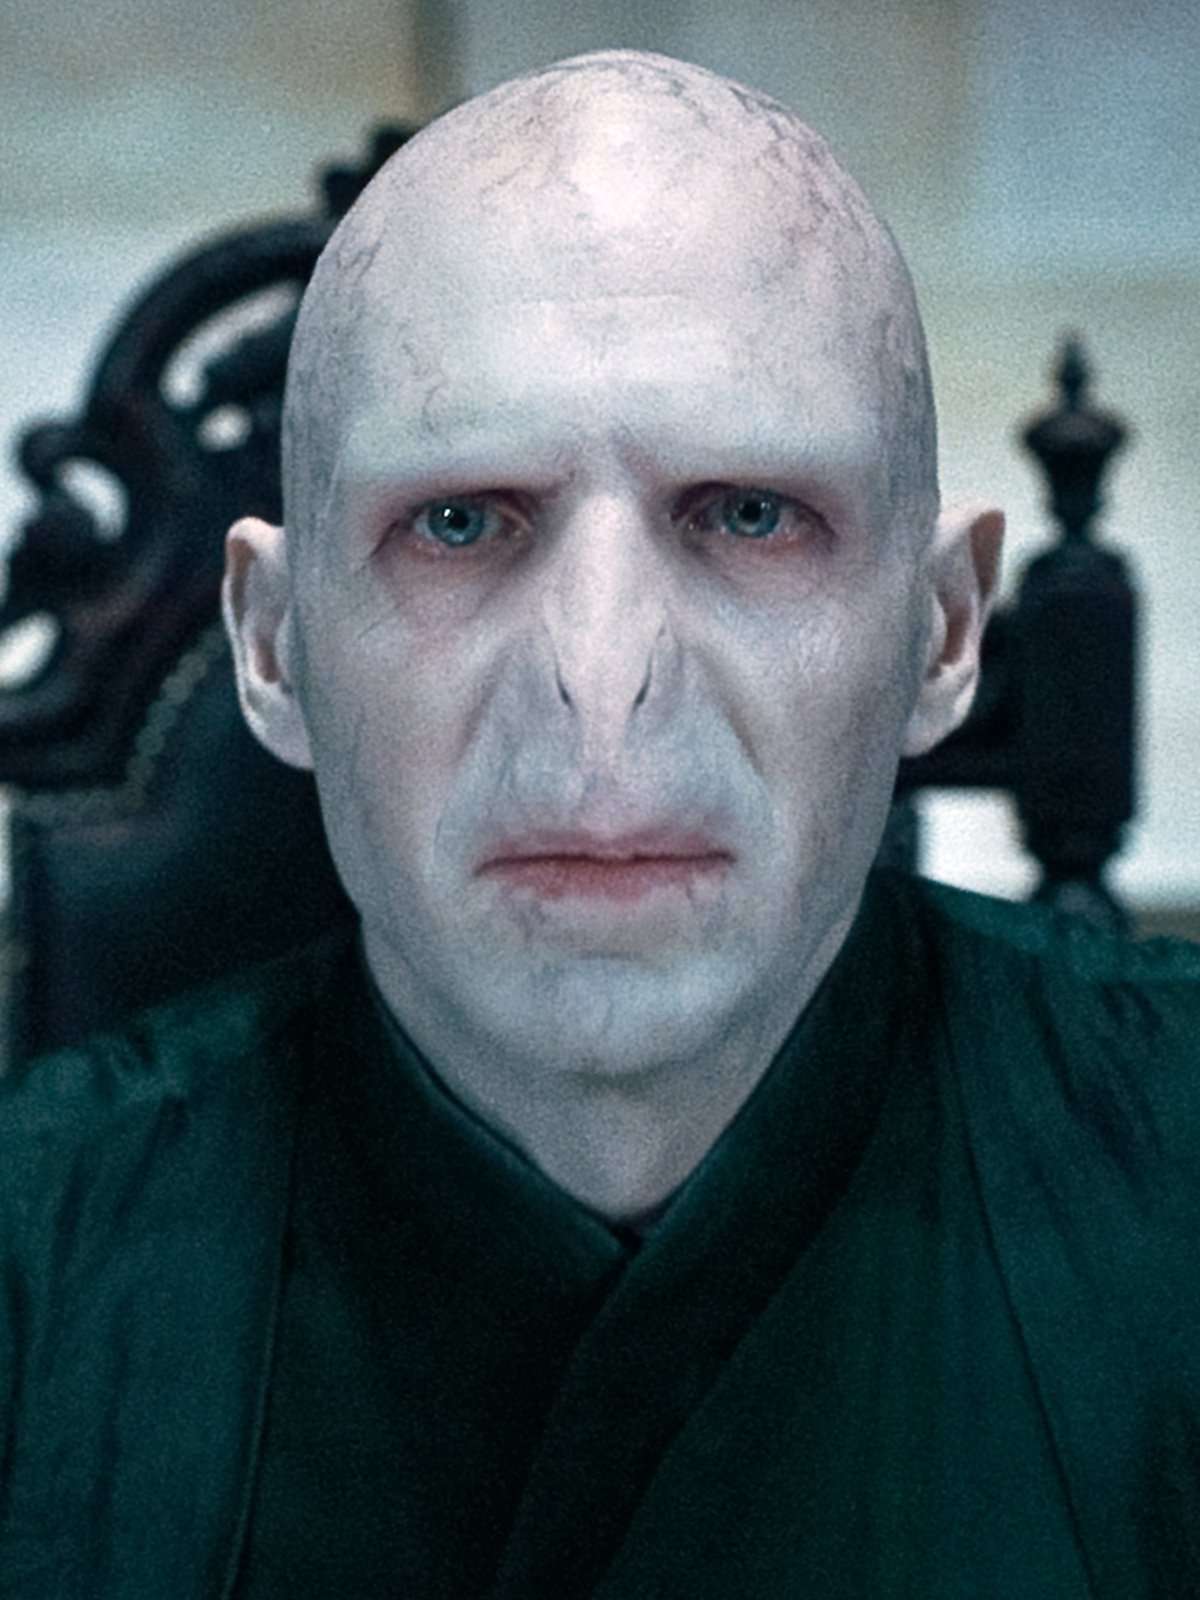 image for TIL Tom Marvolo Riddle's name had to be translated into 68 languages, while still being an anagram for "I am Lord Voldemort", or something of equal meaning.